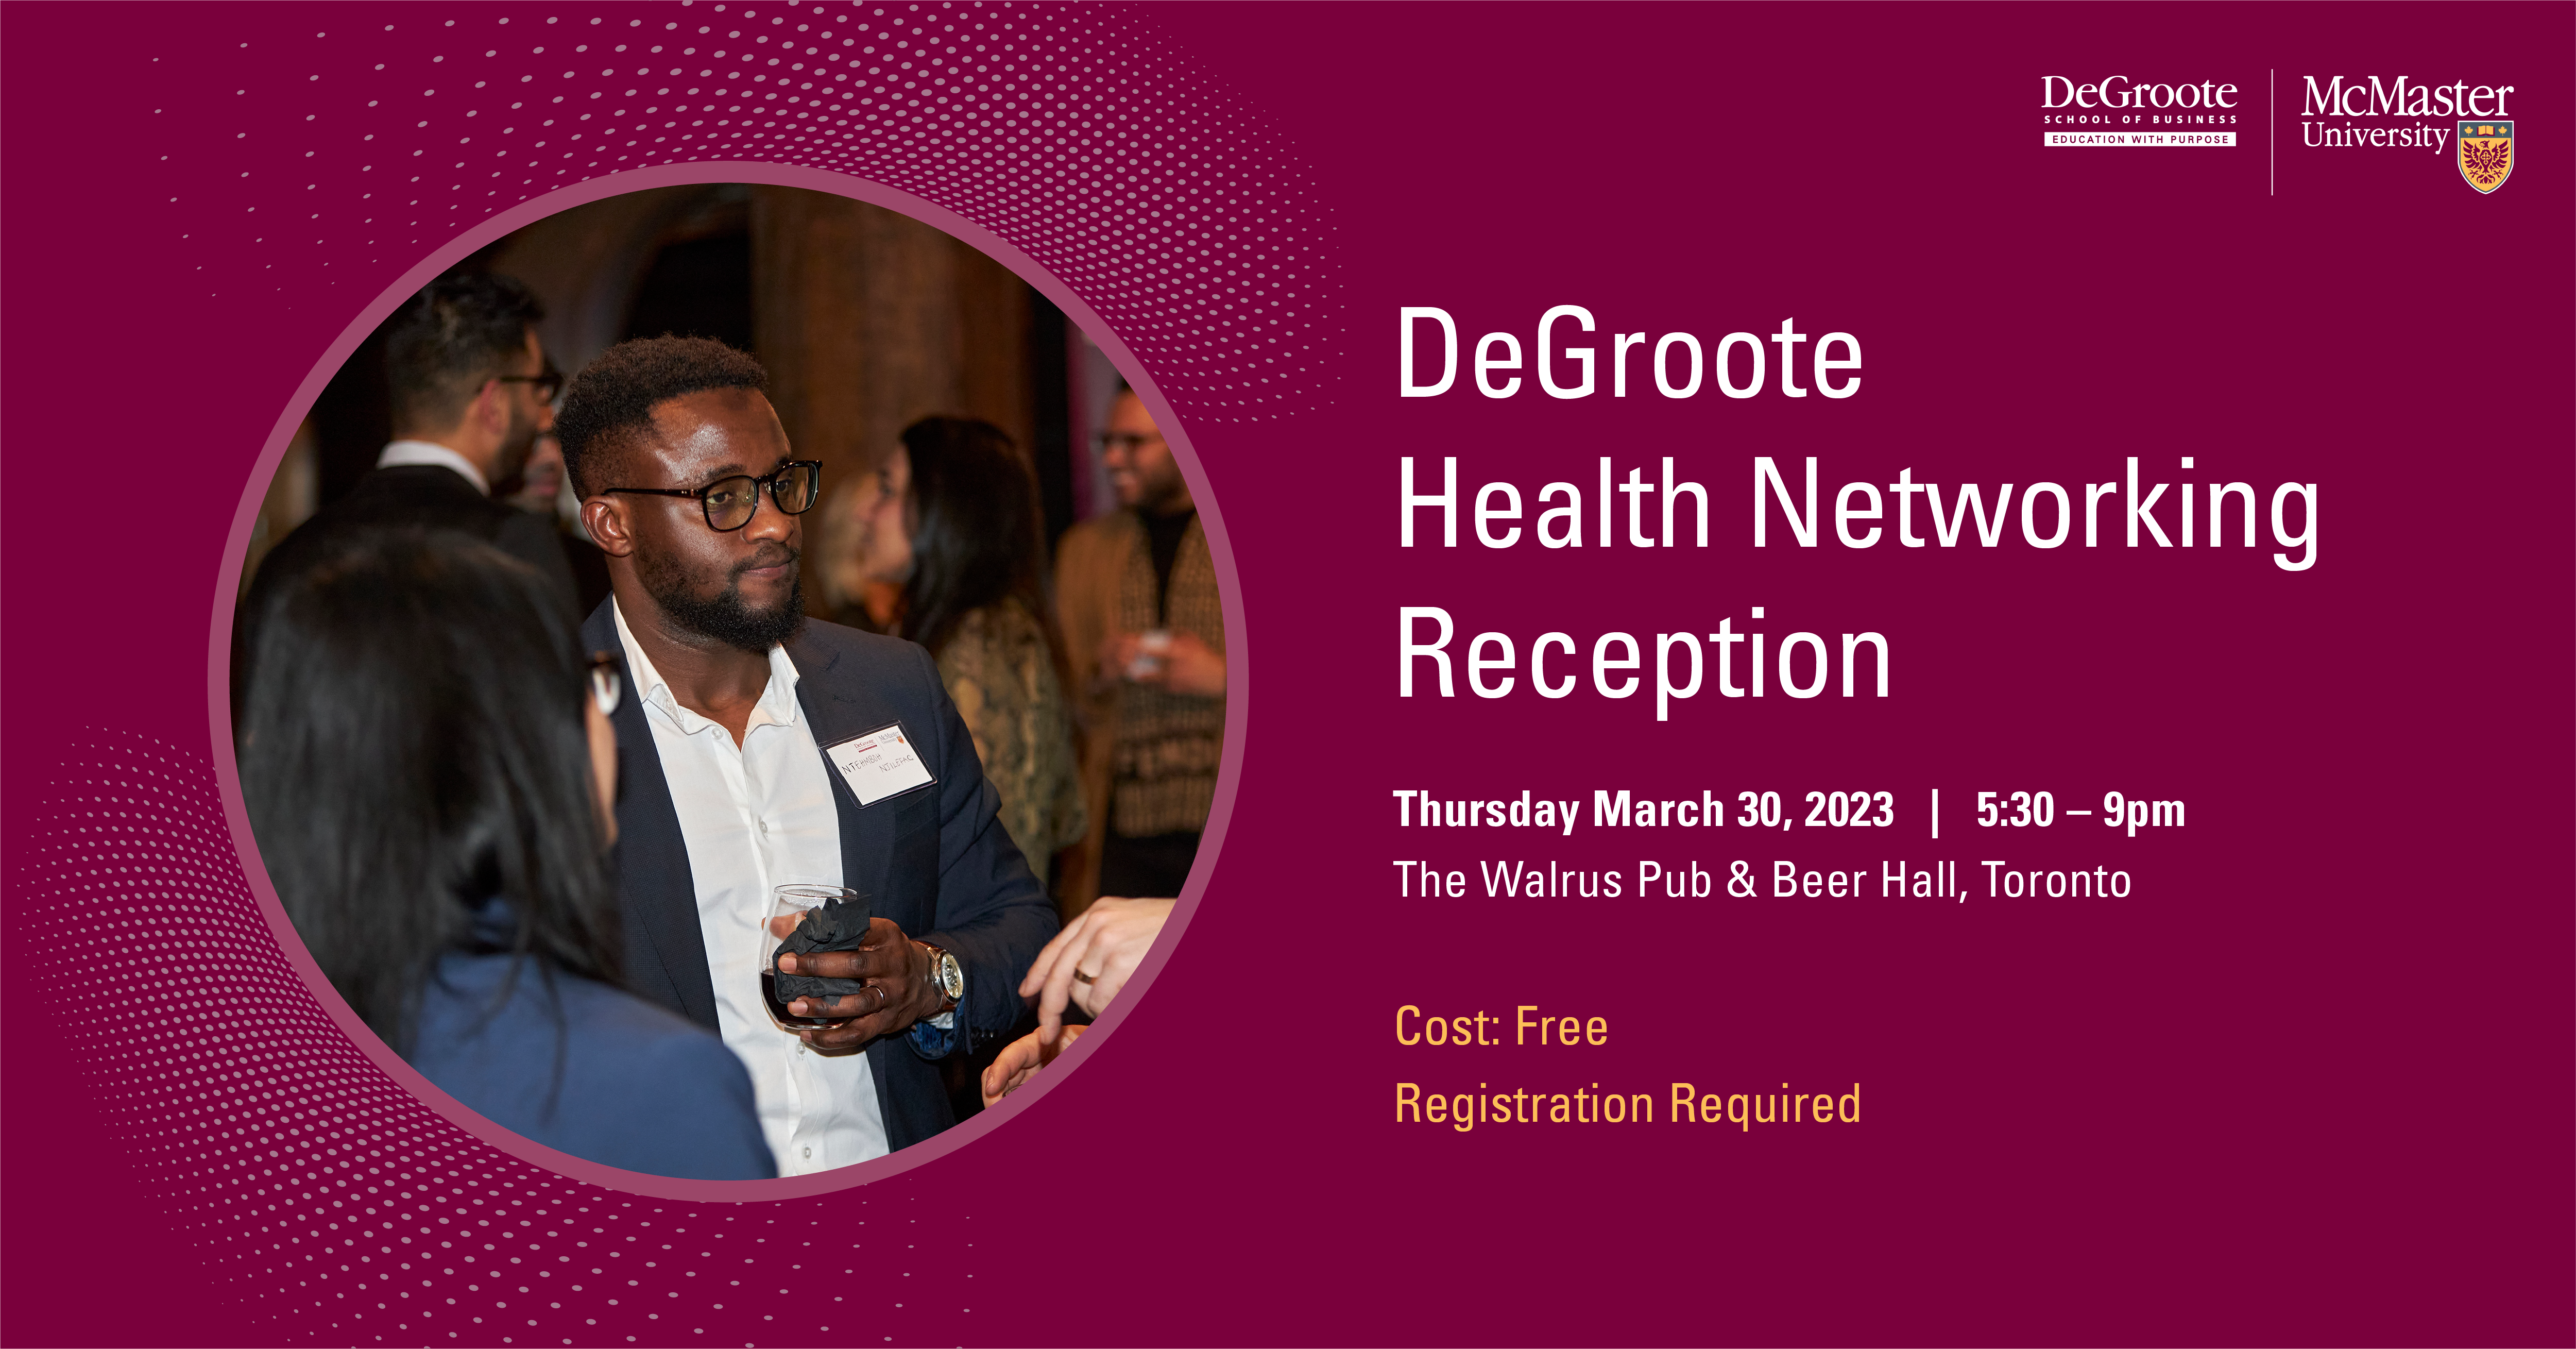 DeGroote Health Networking Reception